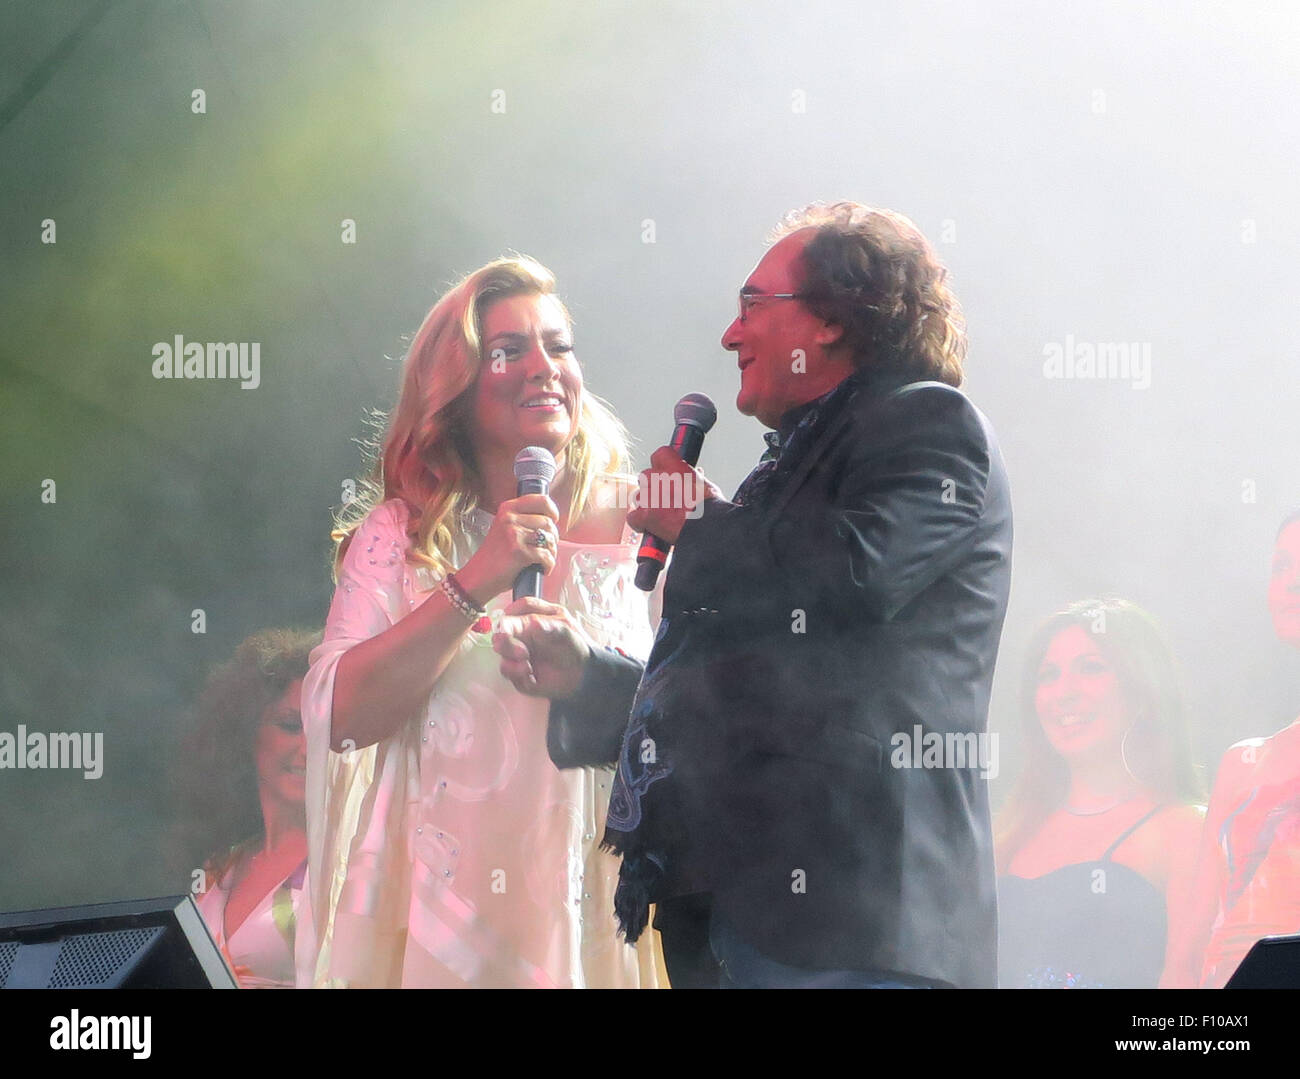 Berlin, Germany. 22nd Aug, 2015. Singer Albano Carrisi alias Al Bano and Romina Power perform at the Waldbuehne in Berlin, Germany, 22 August 2015. The two shared a stage for the fist time in 20-years. Photo: Xamax/dpa - NO WIRE SERVICE -/dpa/Alamy Live News Stock Photo